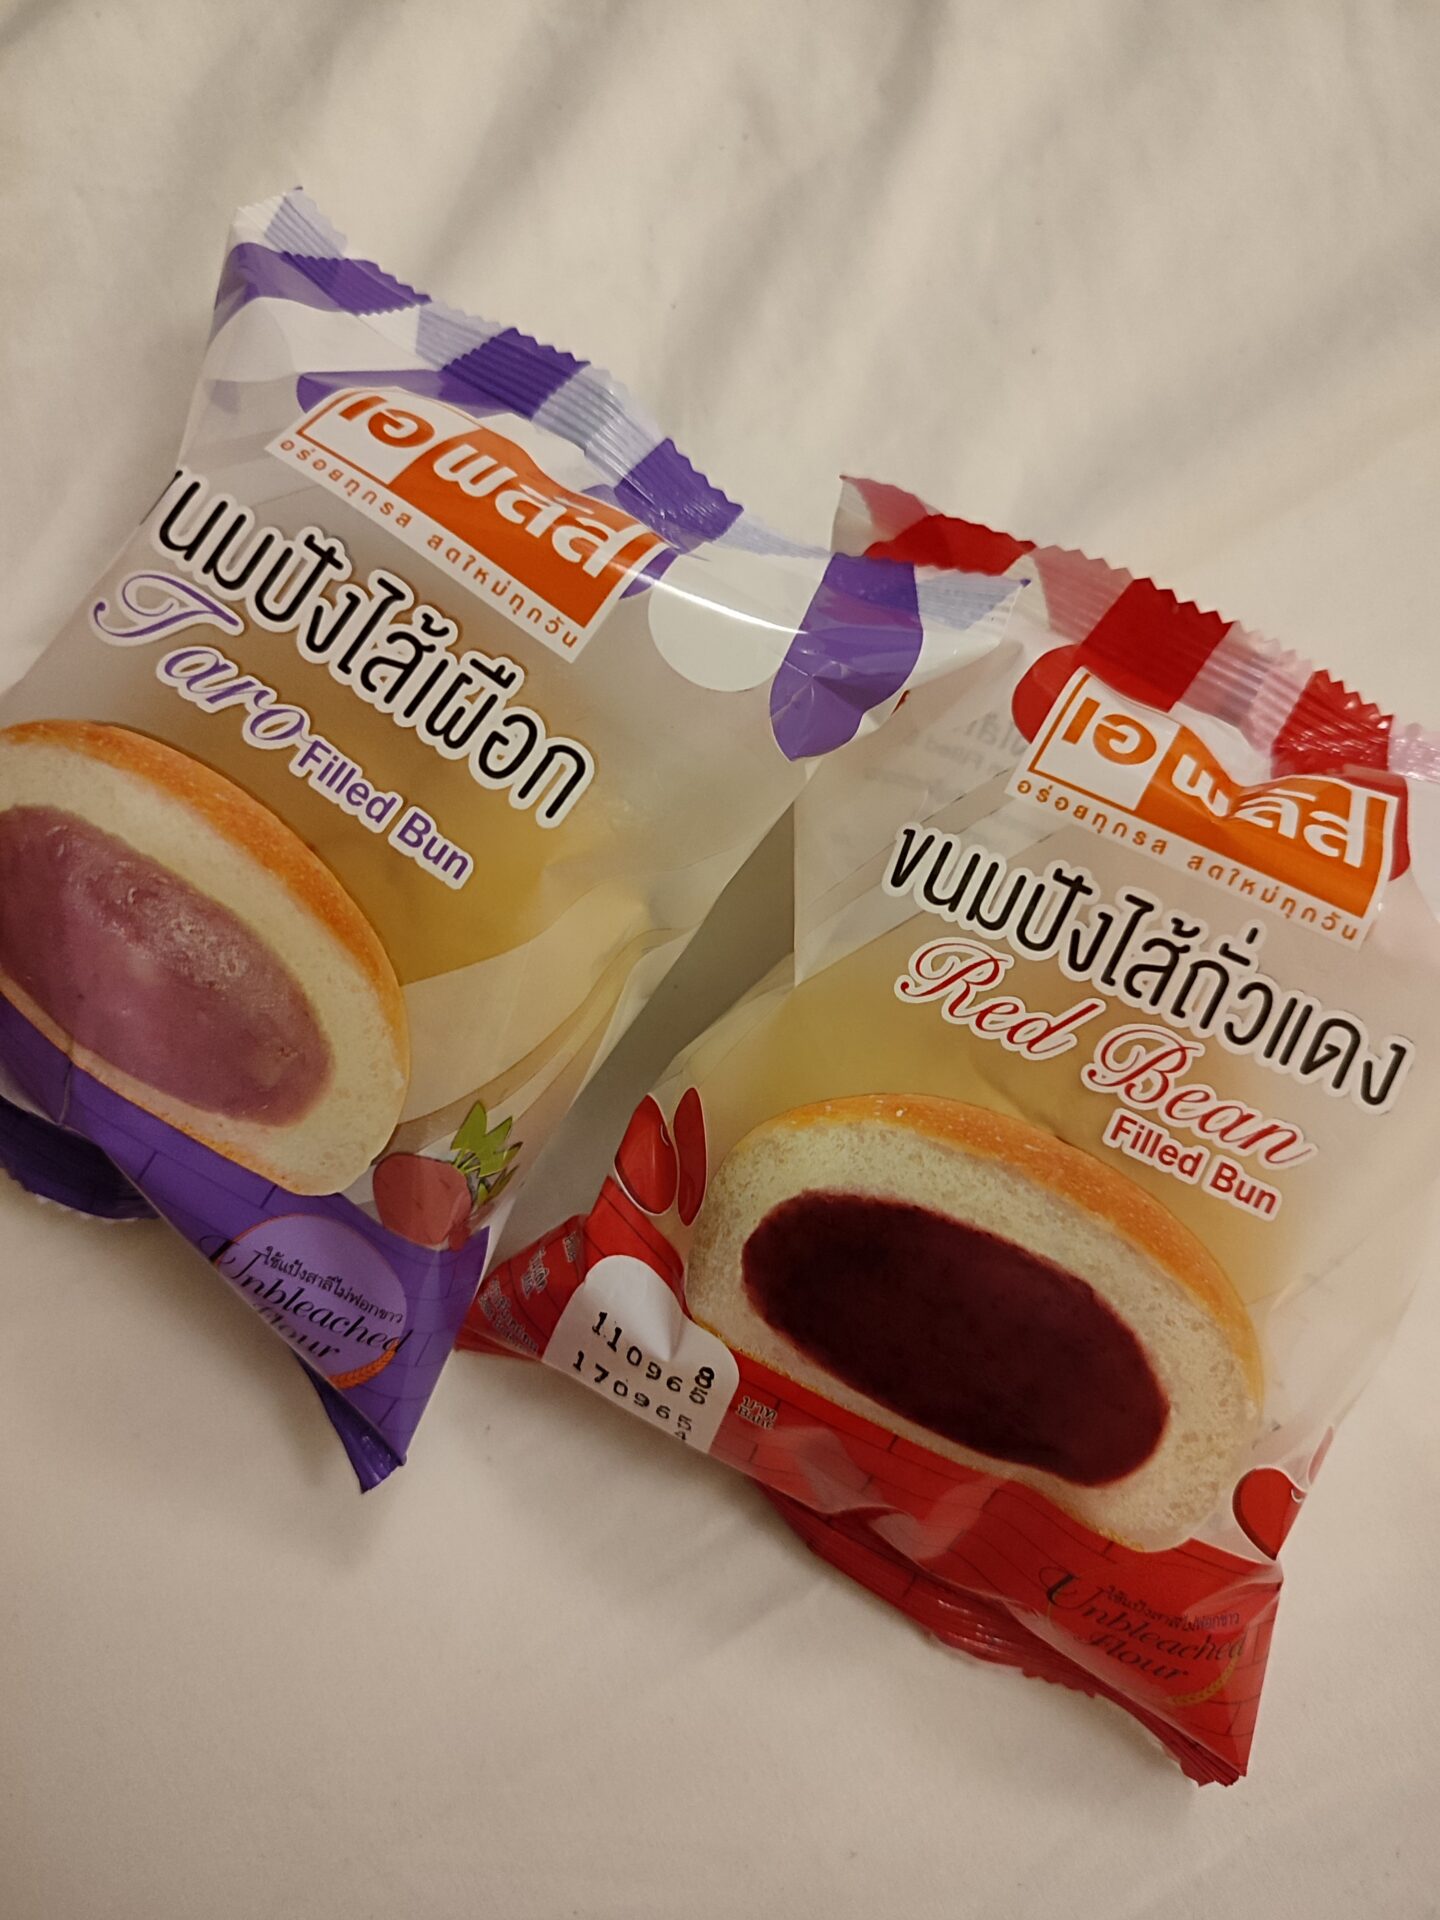 taro and red bean paste buns from 7/11. cost of 5 nights in Bangkok